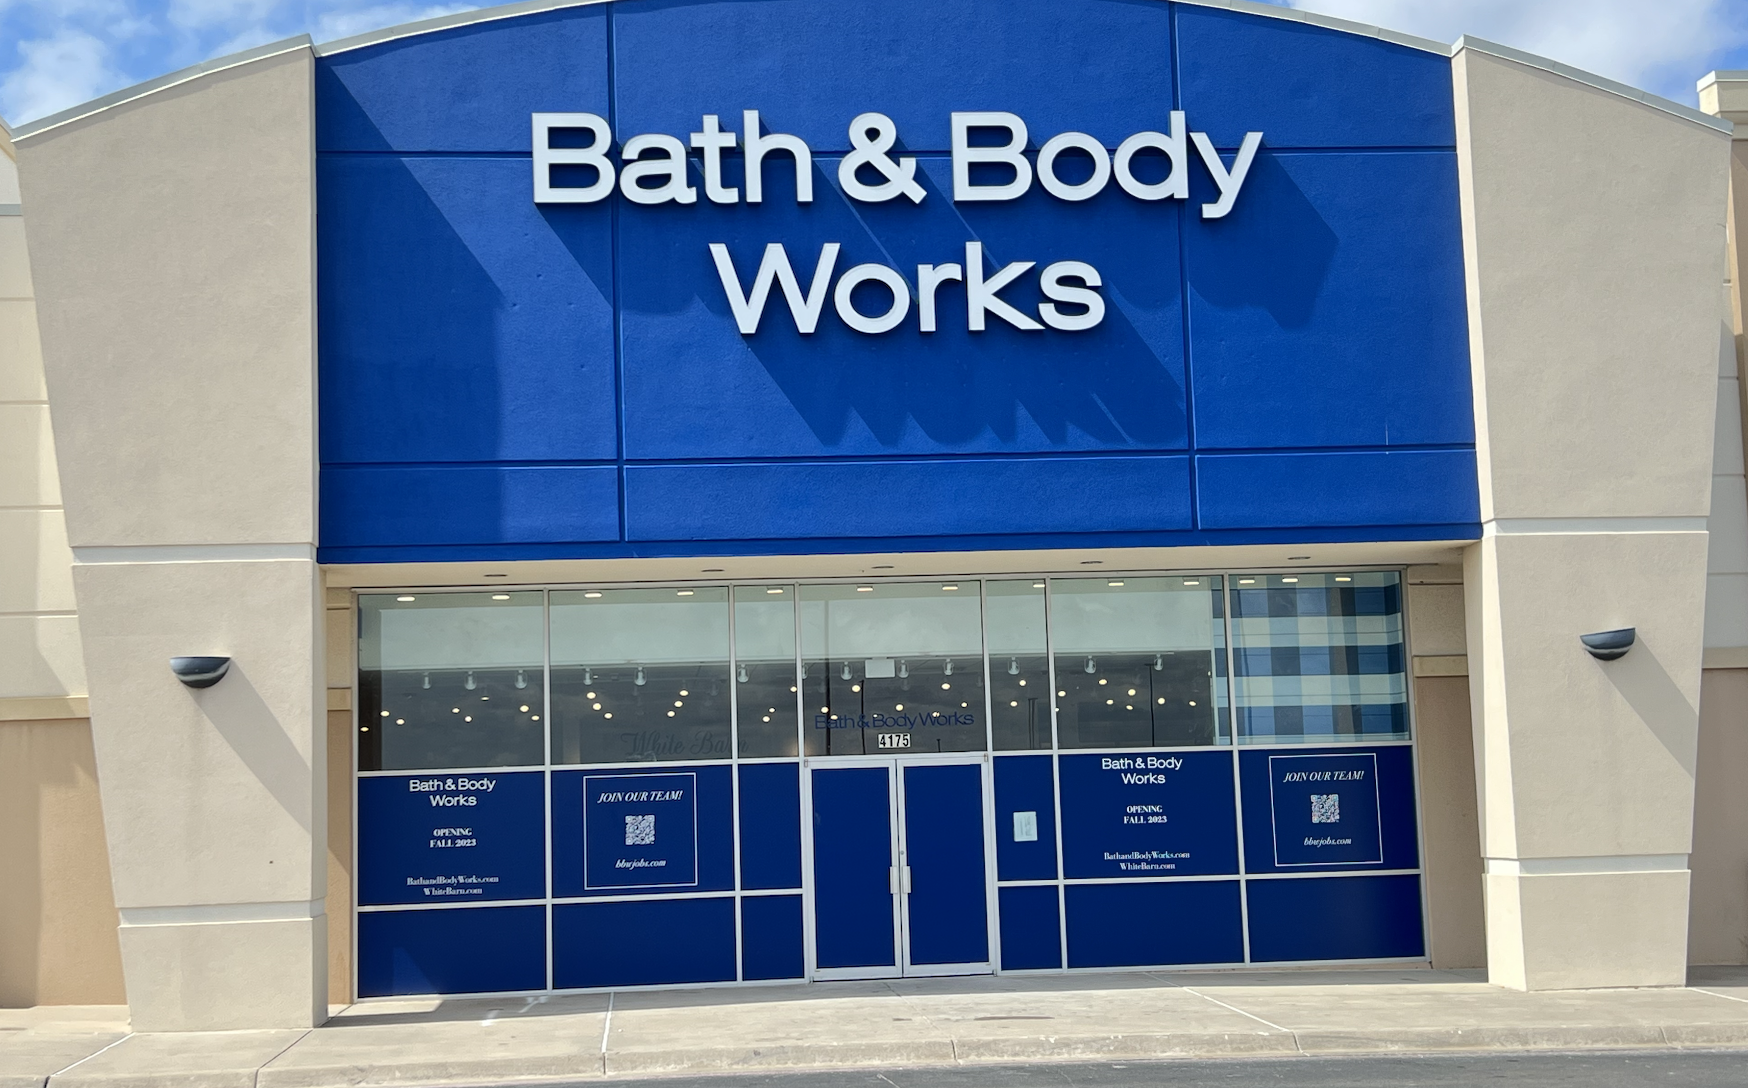 New Bath & Body Works to Open Soon in San Angelo